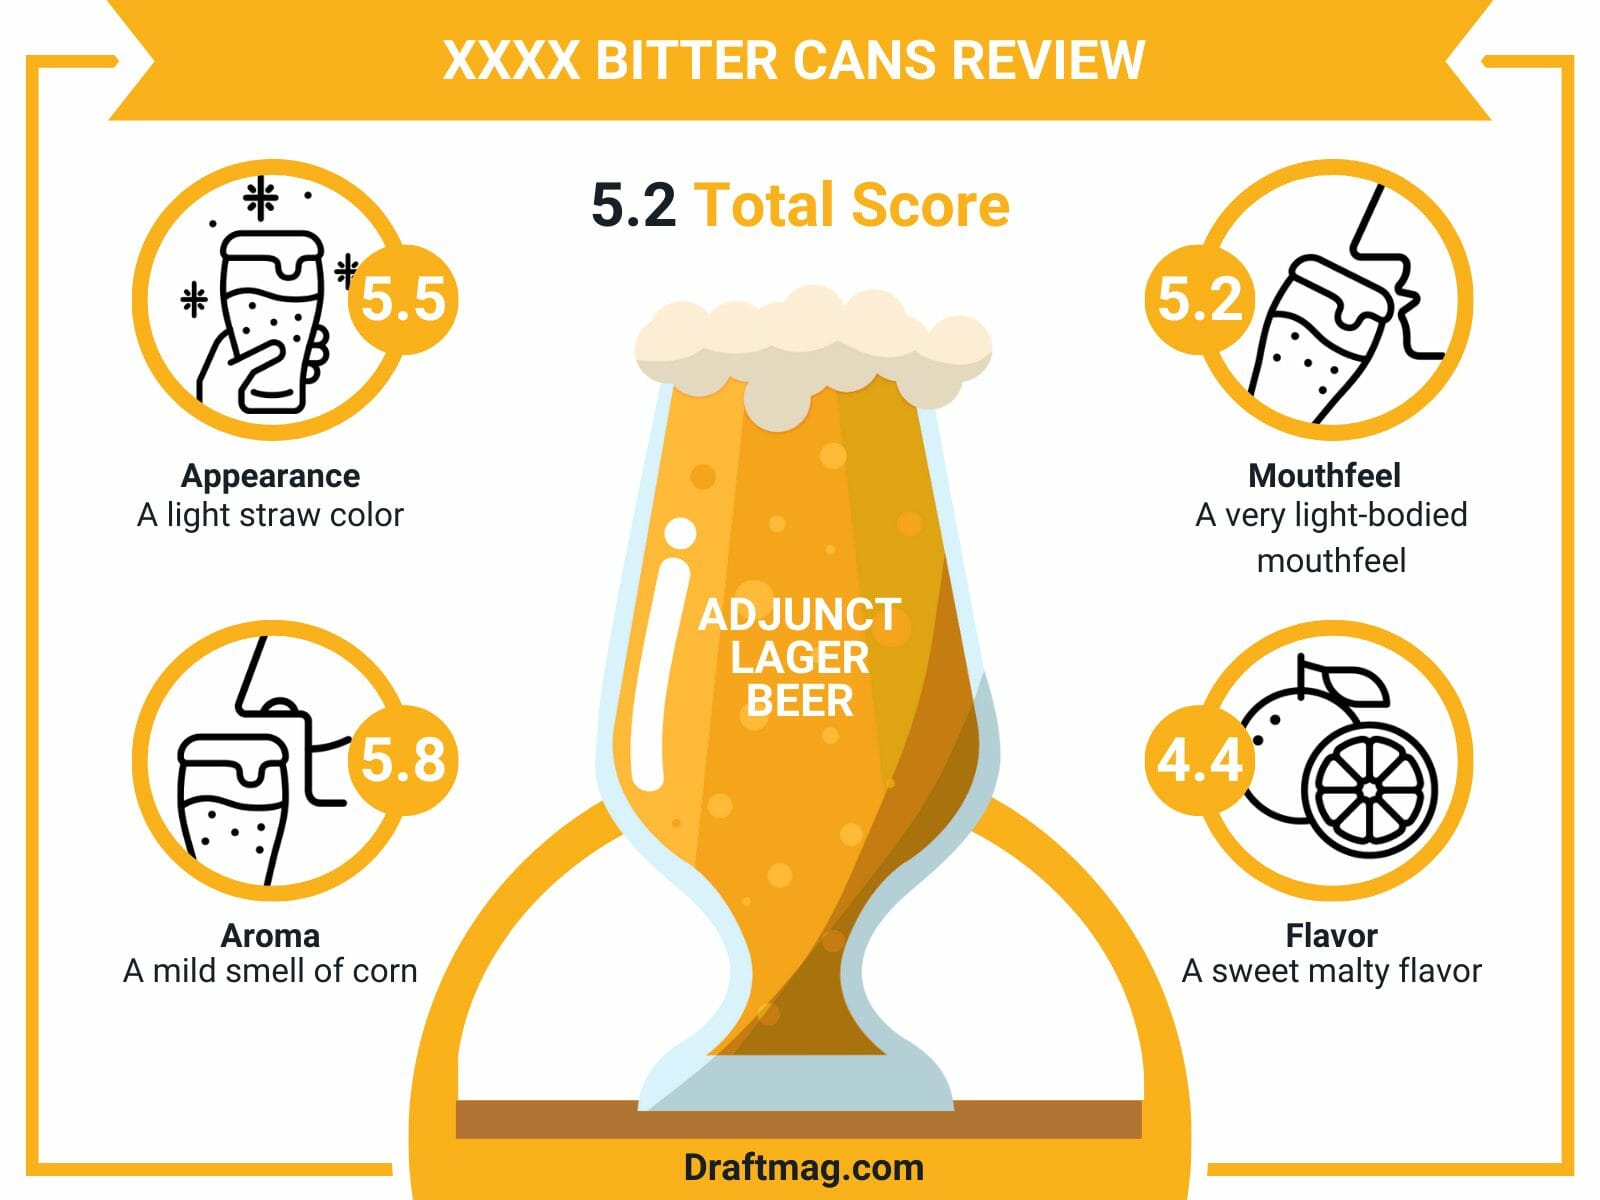 XXXX Bitter Cans Review Infographic